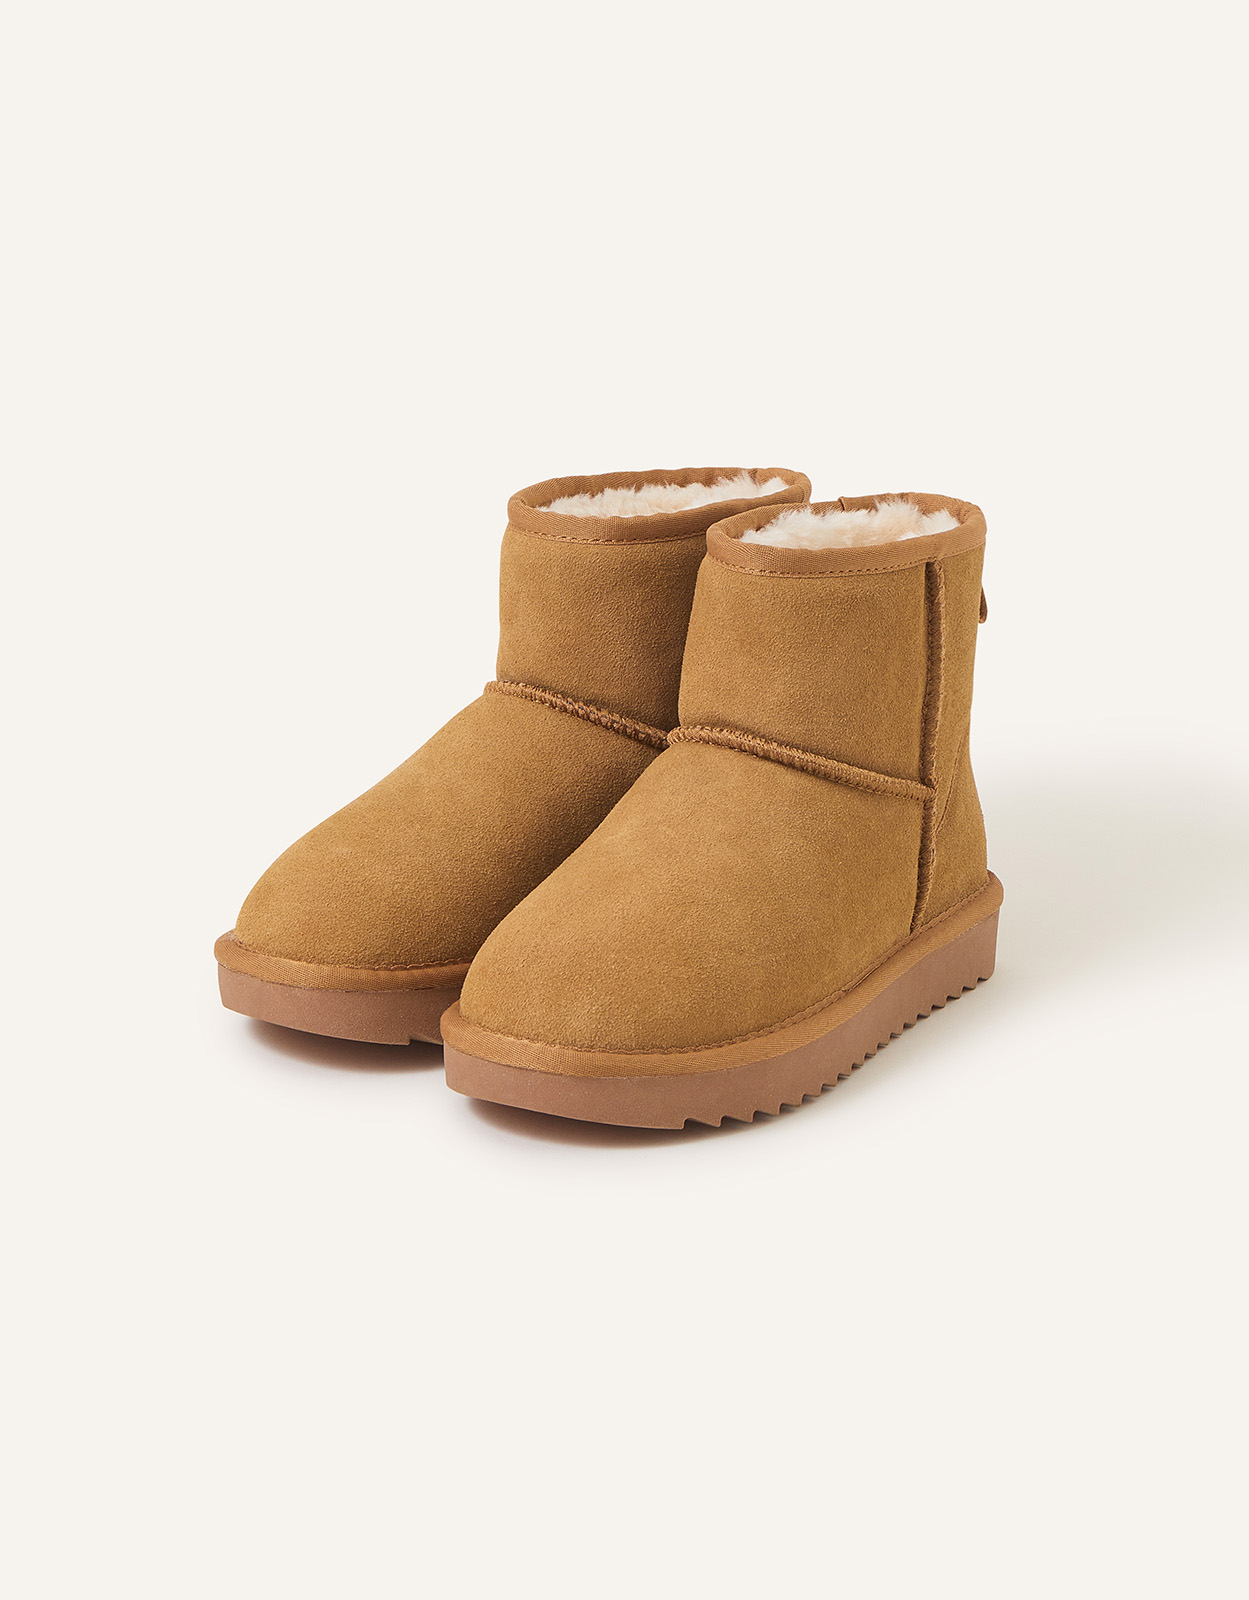 Accessorize Mid Suede Boots Tan, Size: 37